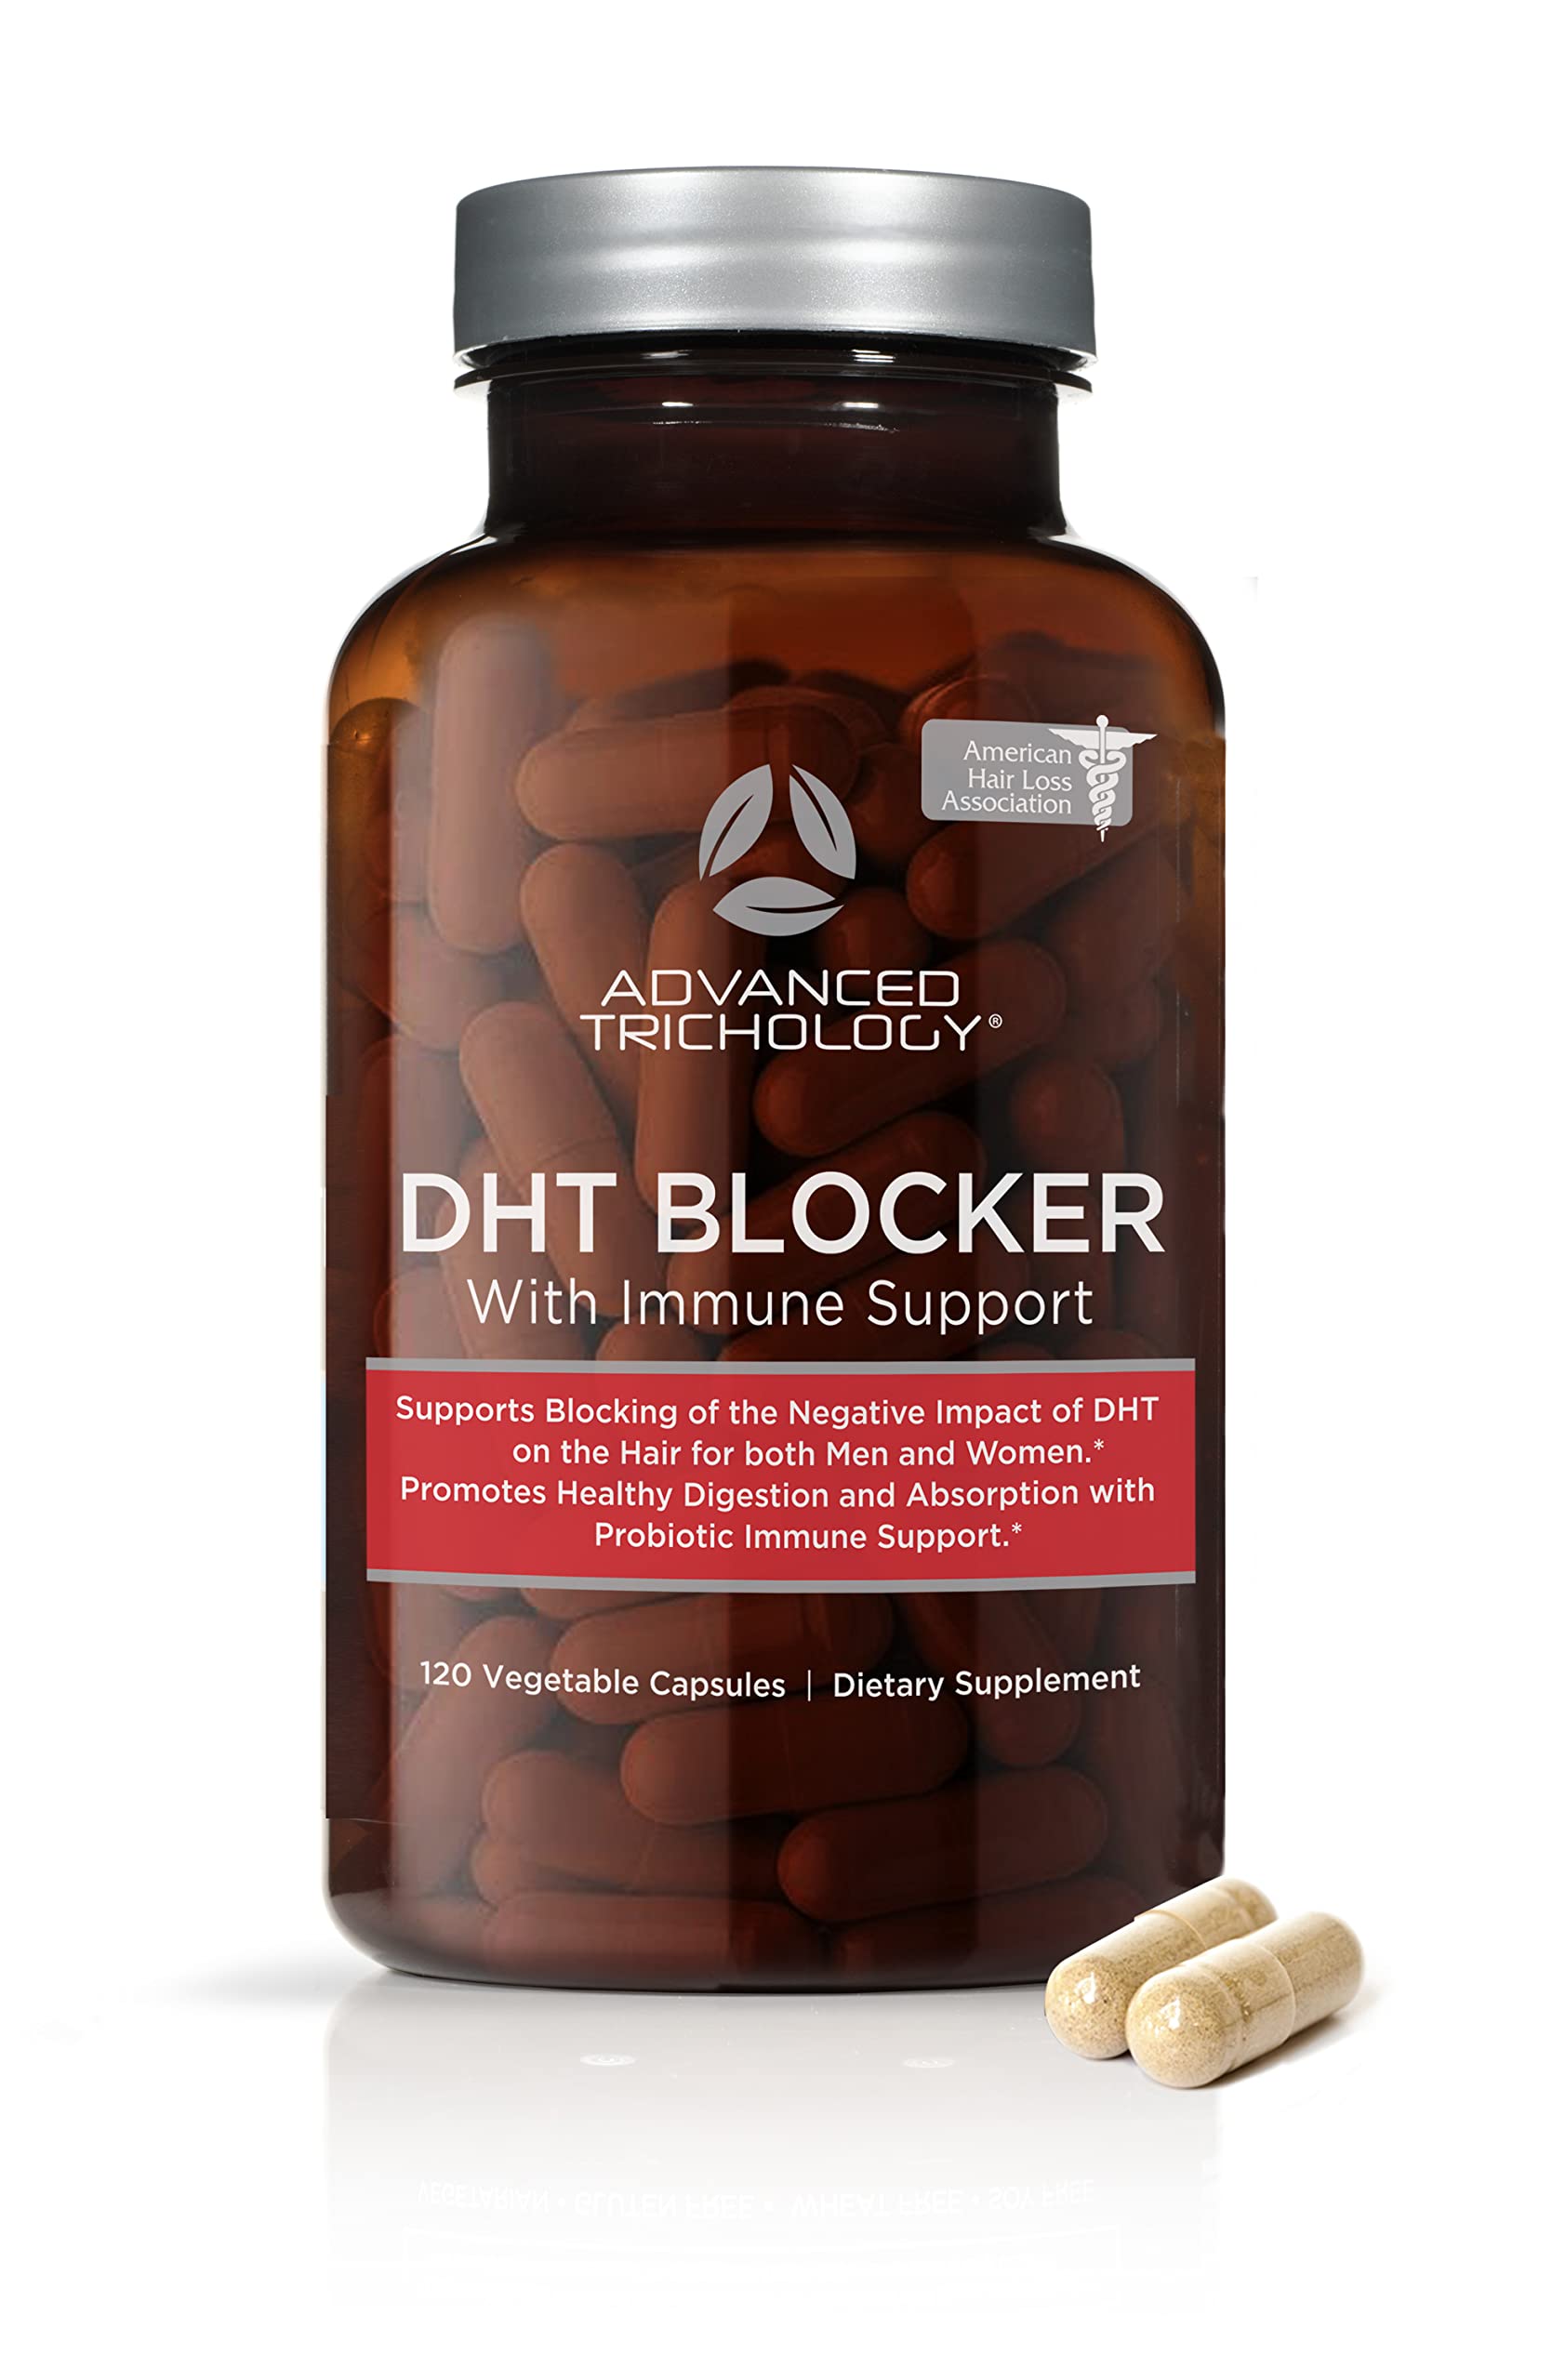 Book Cover DHT BLOCKER - Hair Growth Supplement for Genetic Thinning for Men and Women | Approved* by American Hair Loss Association | Guaranteed, Backed by 20 Years of Experience in Hair Loss Treatment Clinics